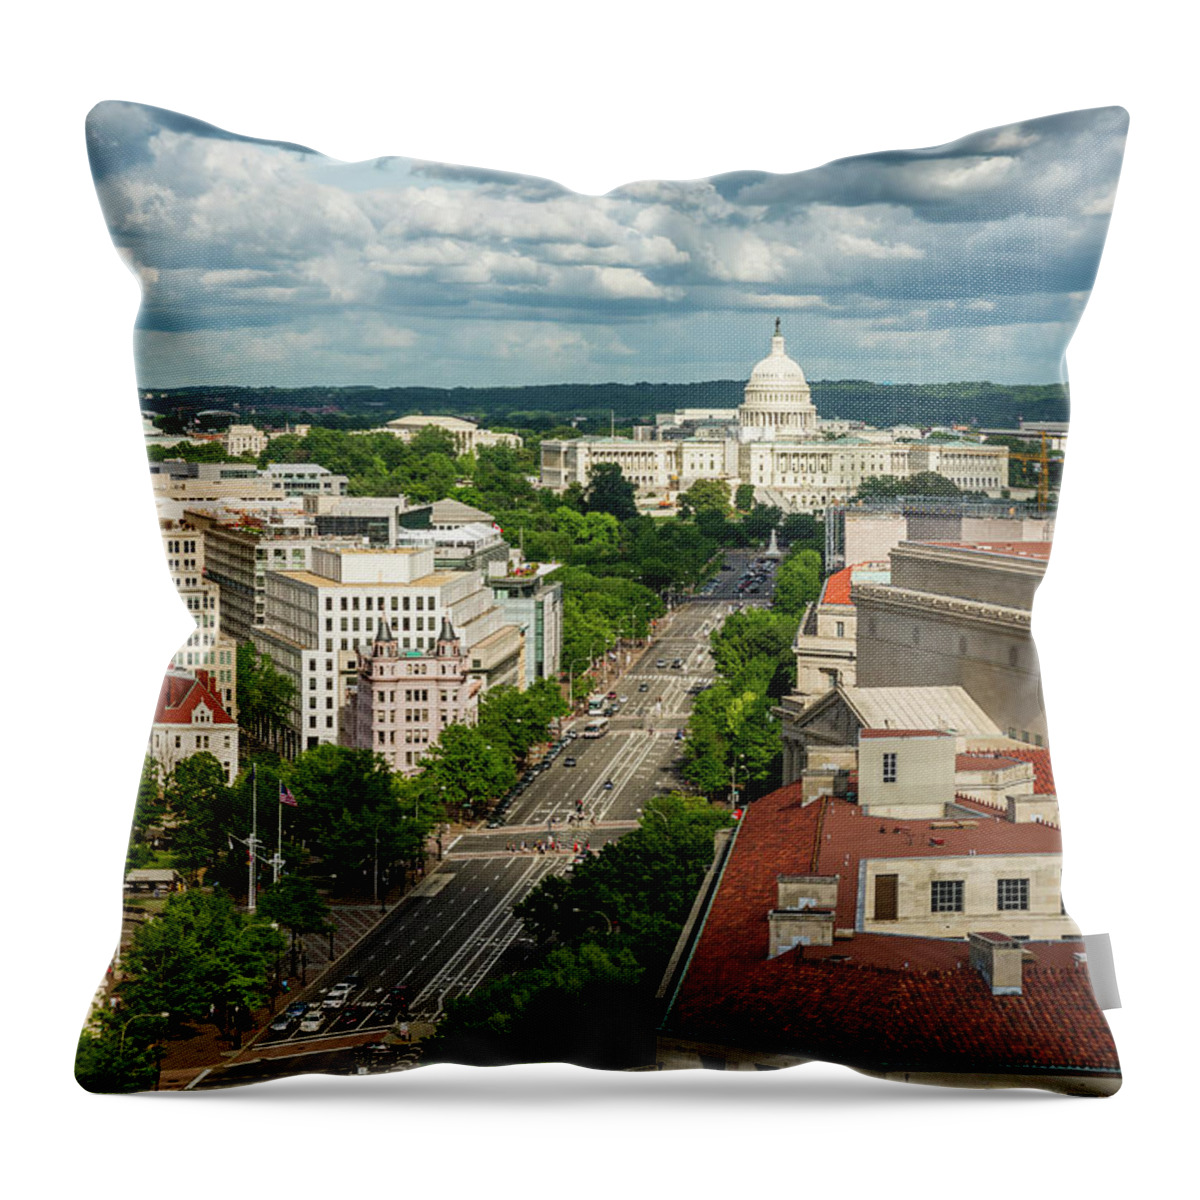 Built Structure Throw Pillow featuring the photograph Pennsylvania Avenue Leading Up To The by Miralex